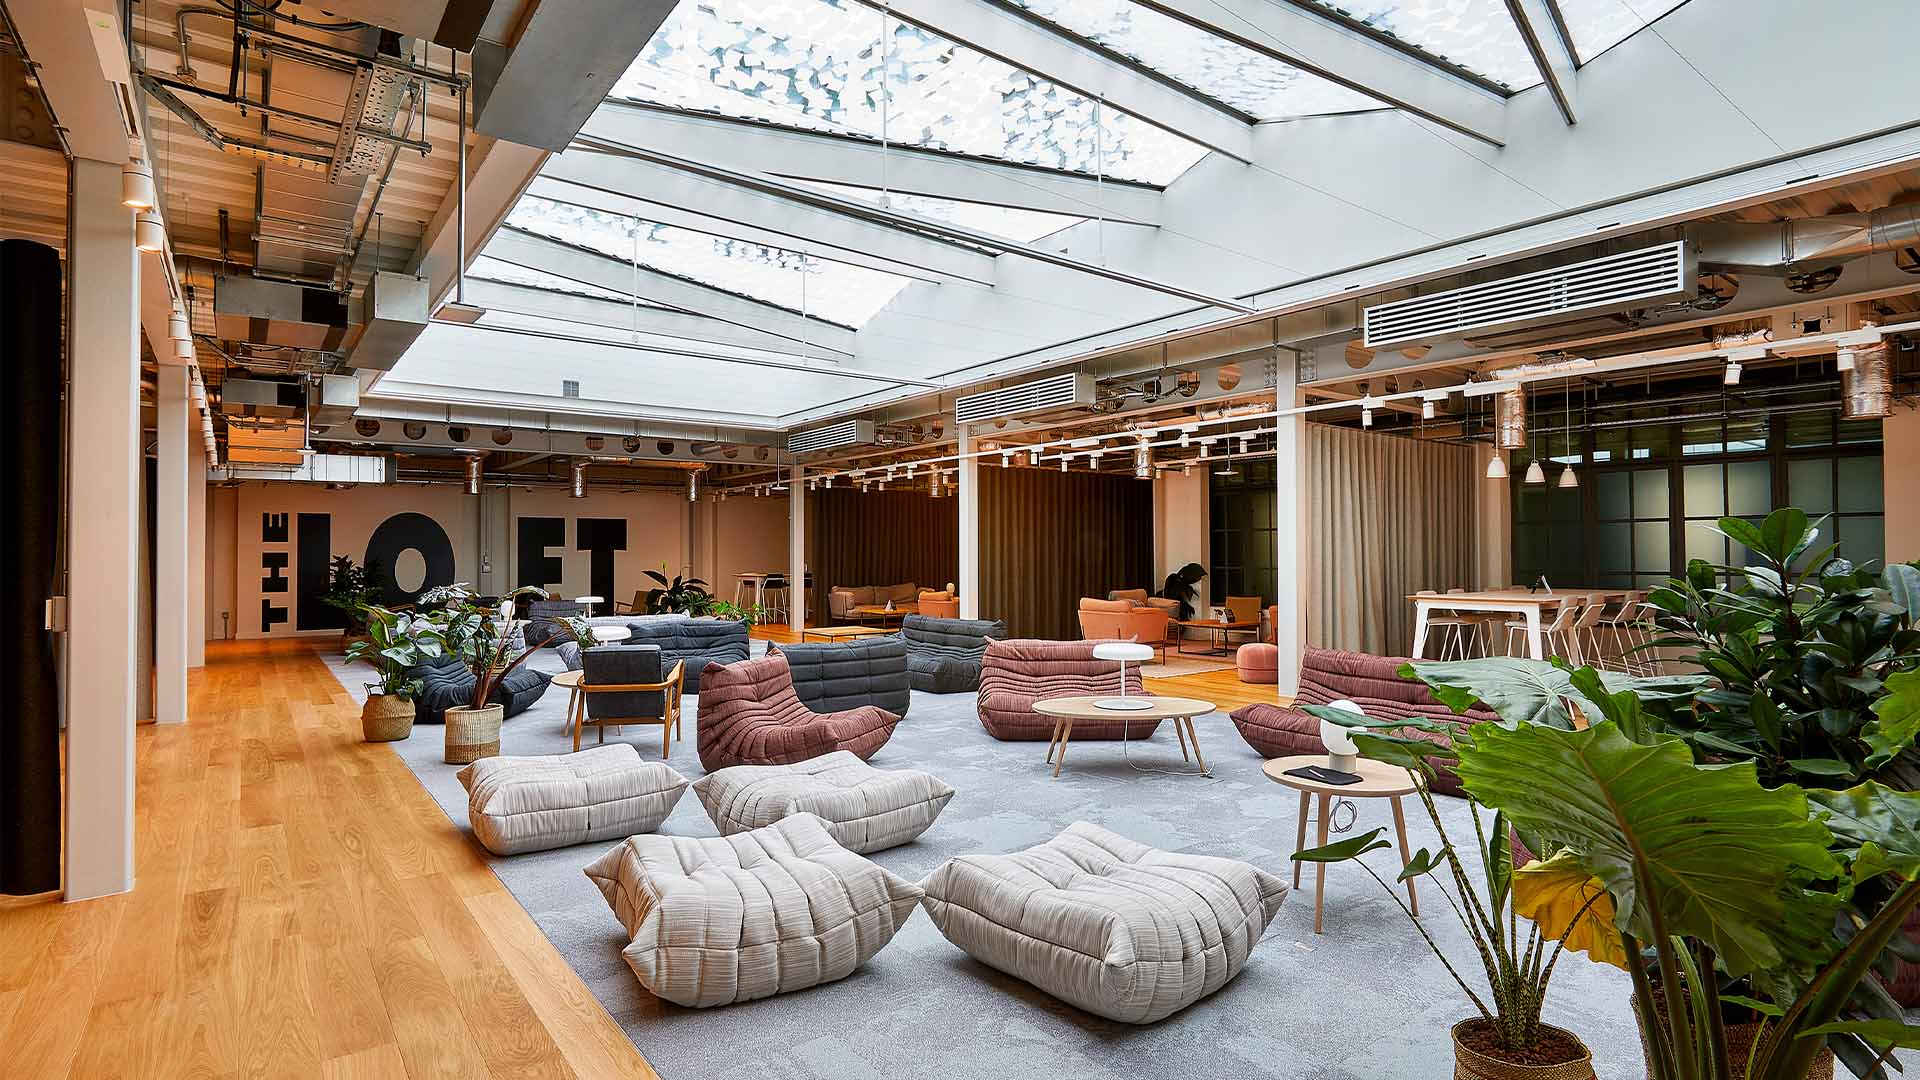 Reimagining the inside of a charming art deco building and transforming the way the company operates, ASOS HQ won the award for Best Refurbished/Recycled Workplace.